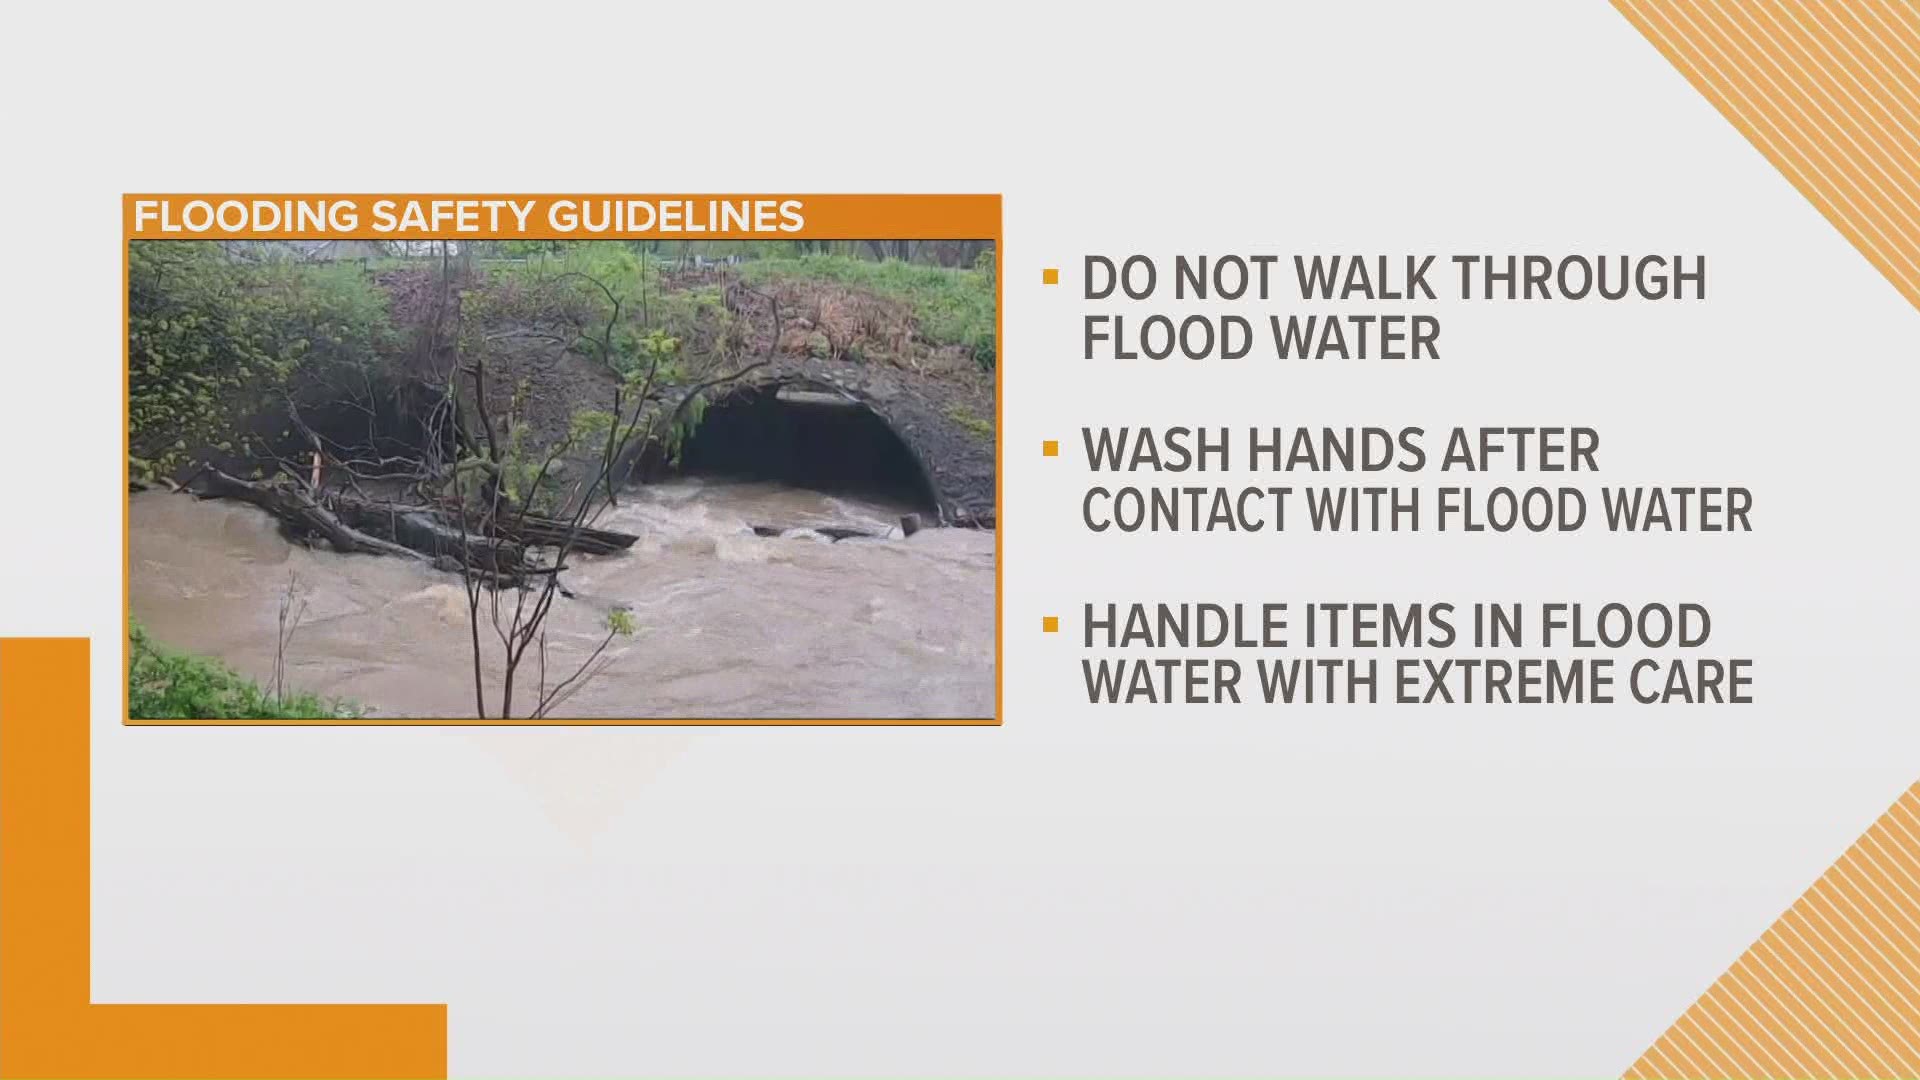 Officials have issued new guidelines and reminders for people near flooding, including not walking through flood waters and washing your hands.